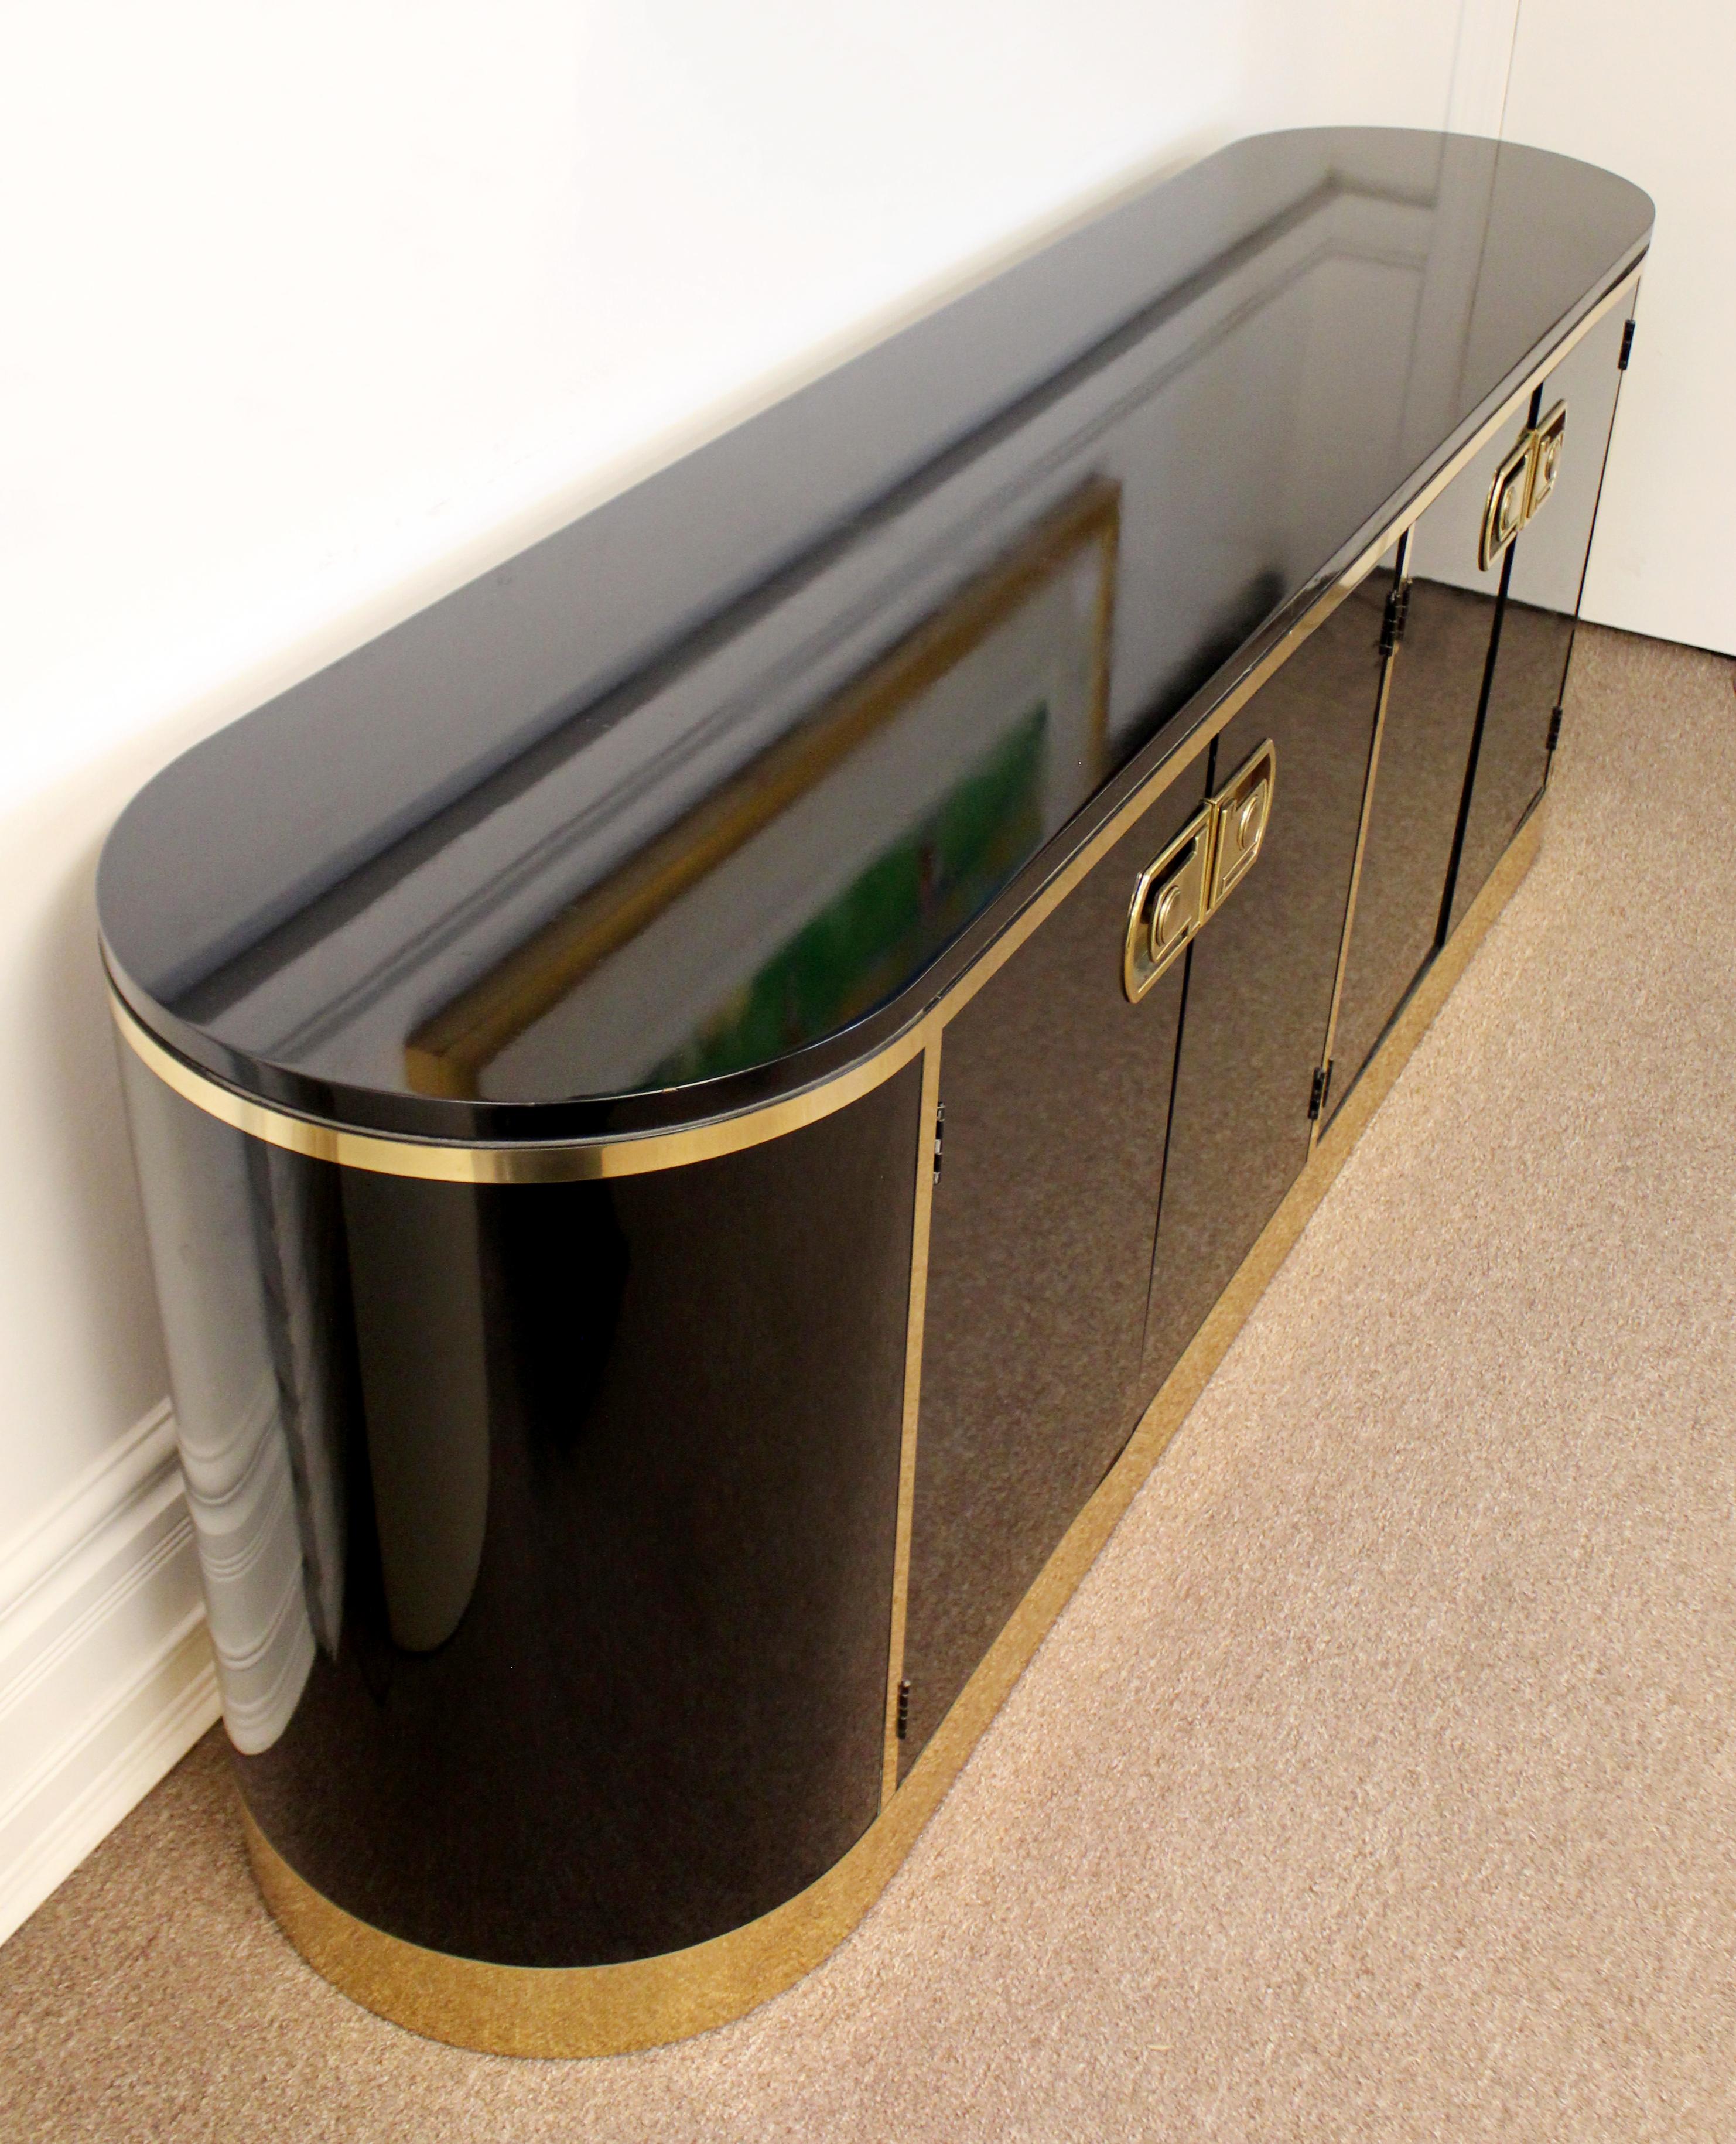 Late 20th Century Mid-Century Modern Mastercraft Black Lacquer and Brass Console Credenza 1970s